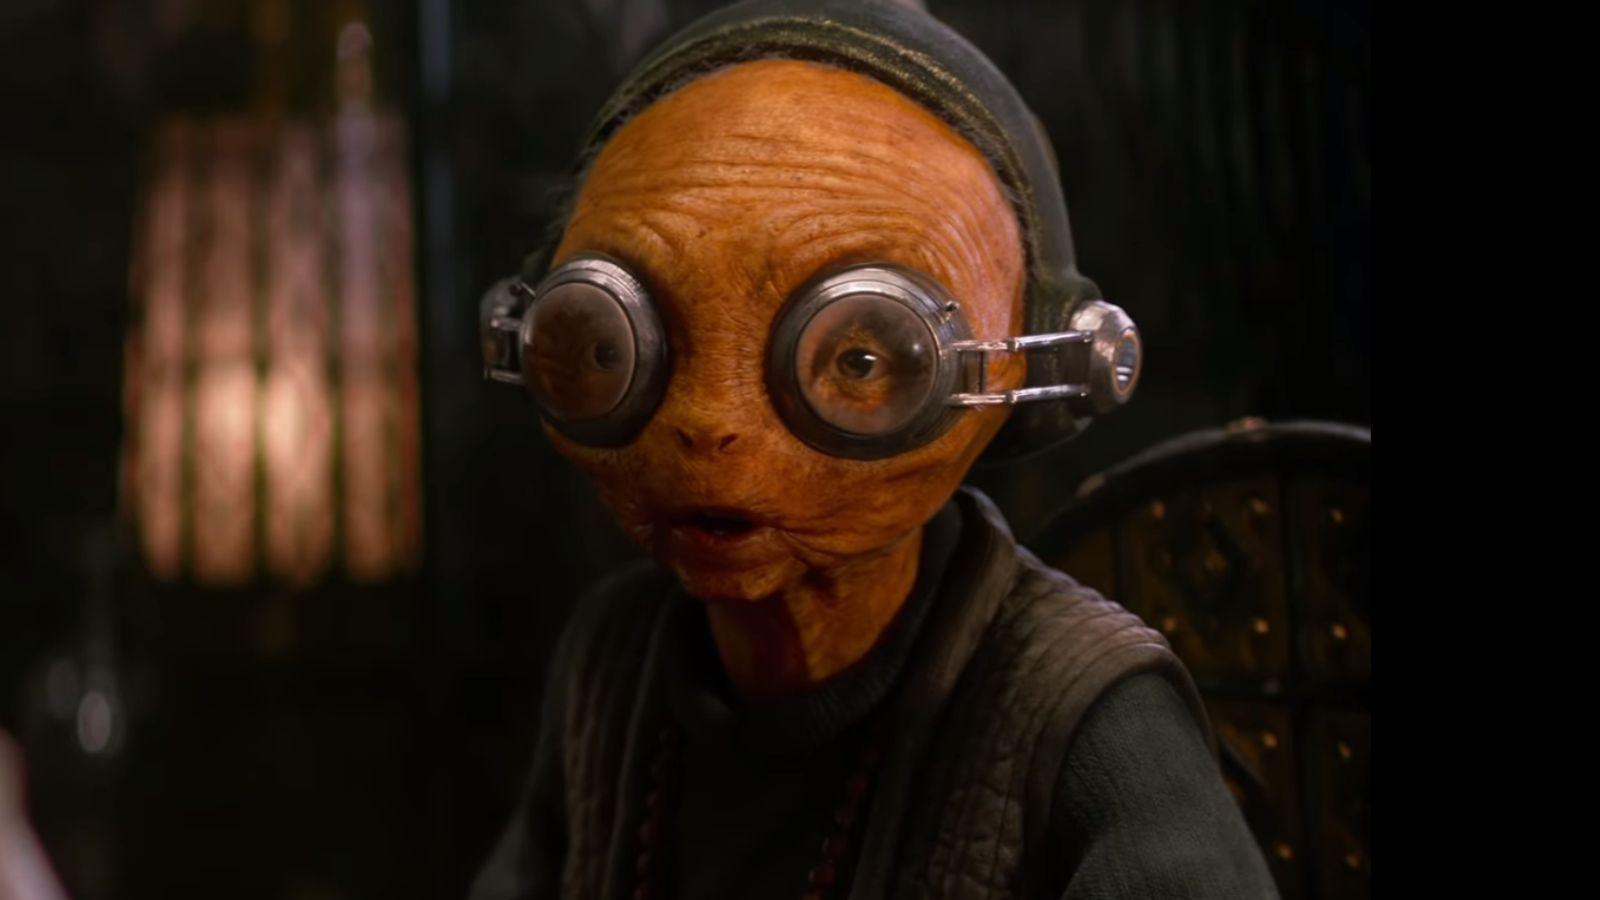 Maz in The Force Awakens.